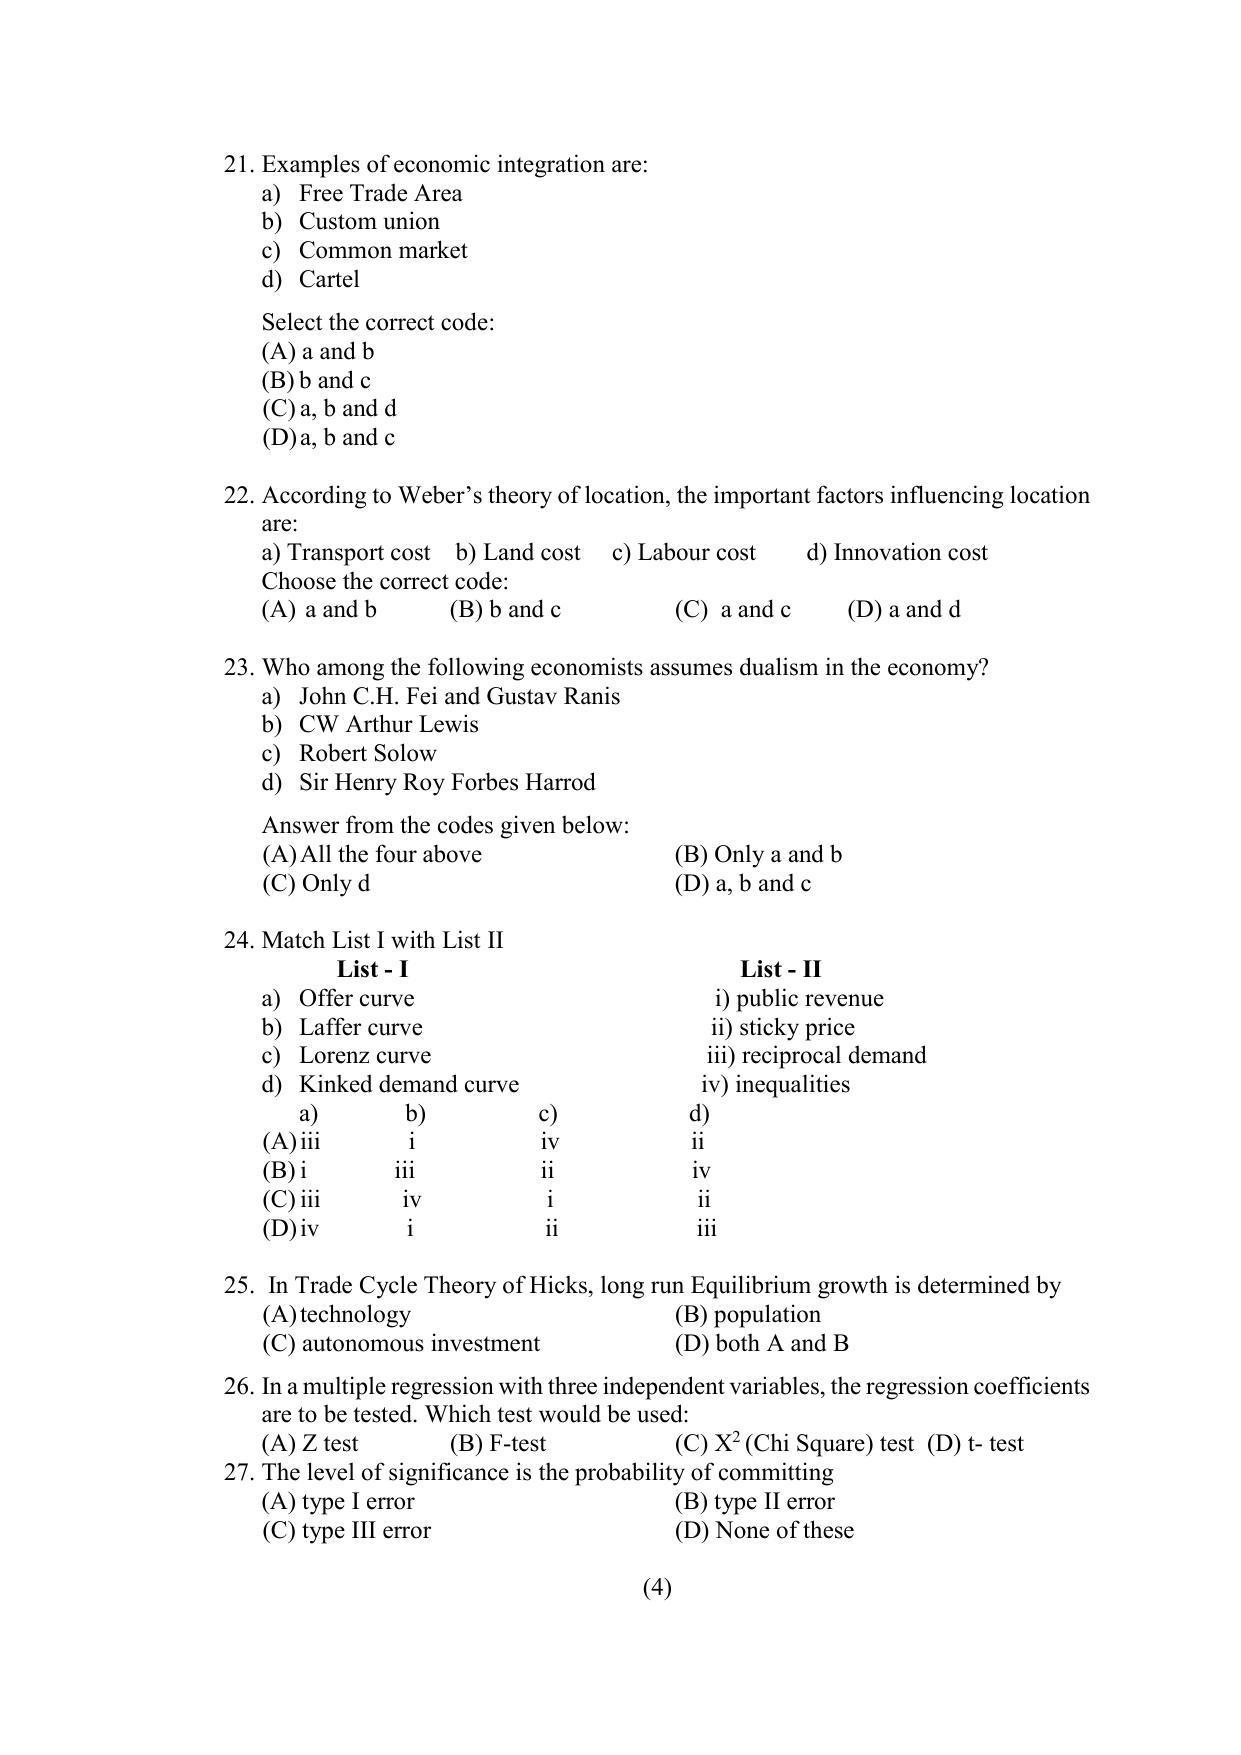 PU MPET Ancient Indian History & Archeology 2022 Question Papers - Page 9